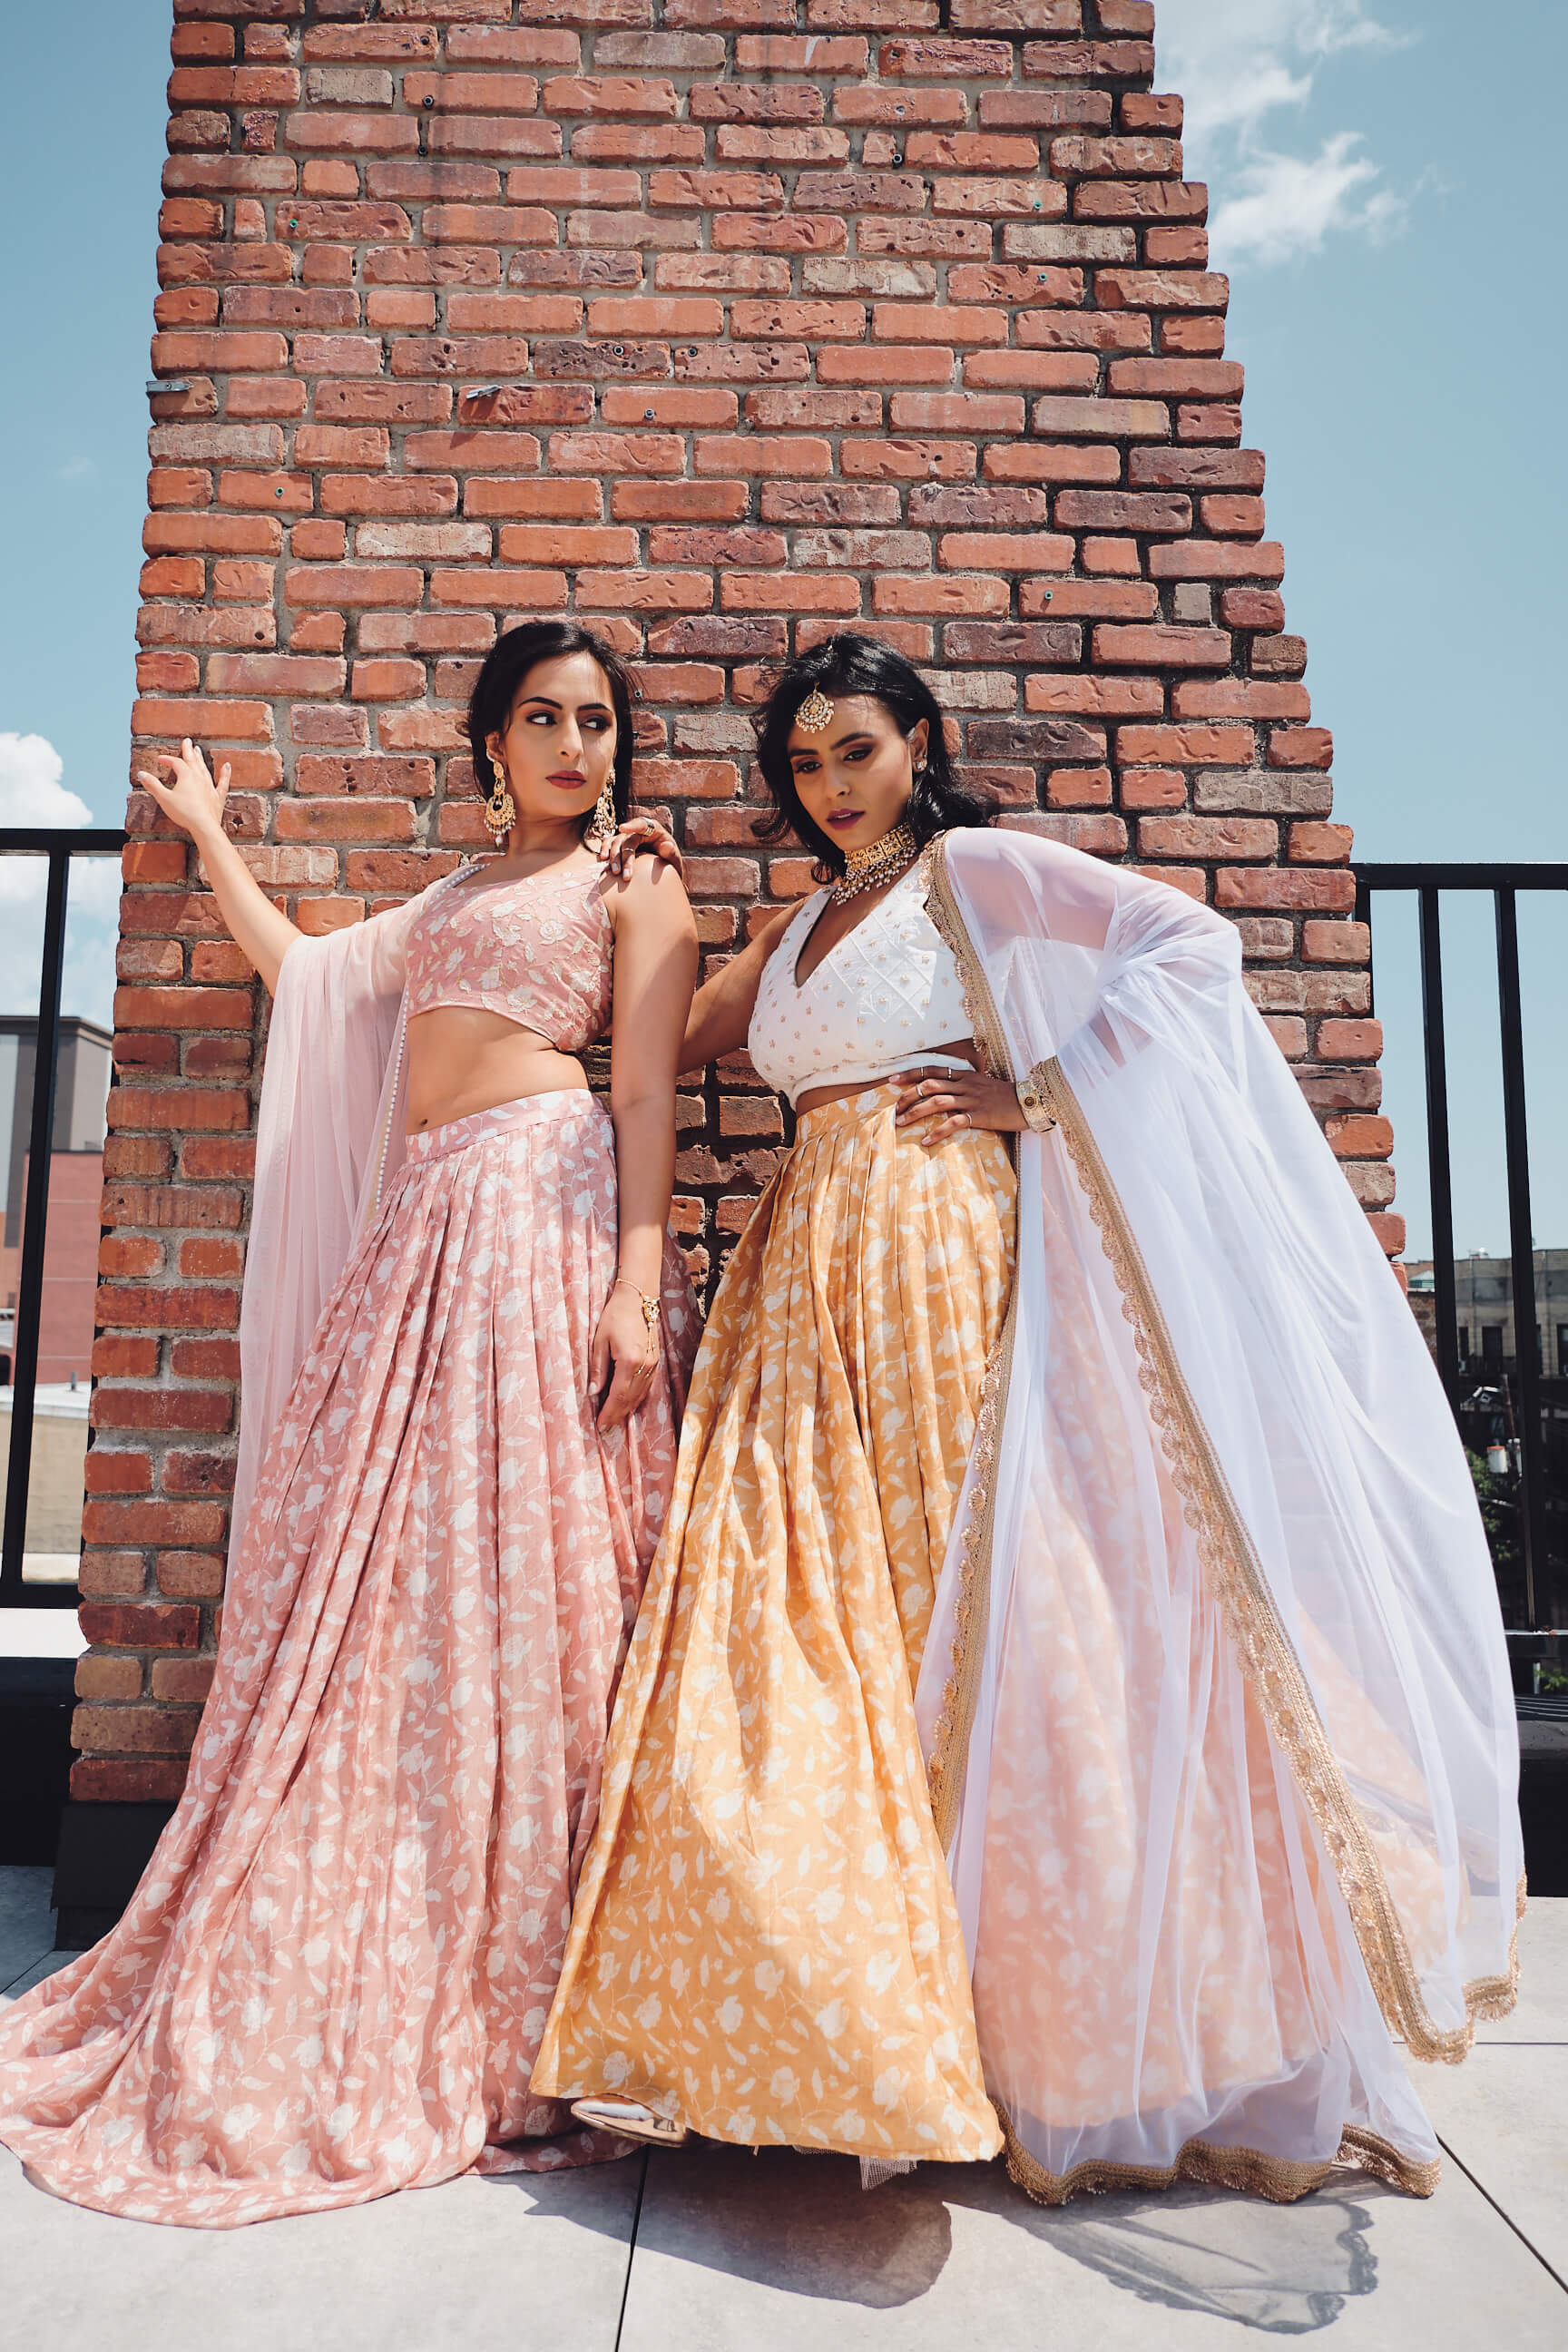 Niraly - Wildflower Clothing Brand - Indian Clothing Brand - Women's Fashion Photography - Clothing Product Photography - Lifestyle Photography - Zona Libre - New Jersey